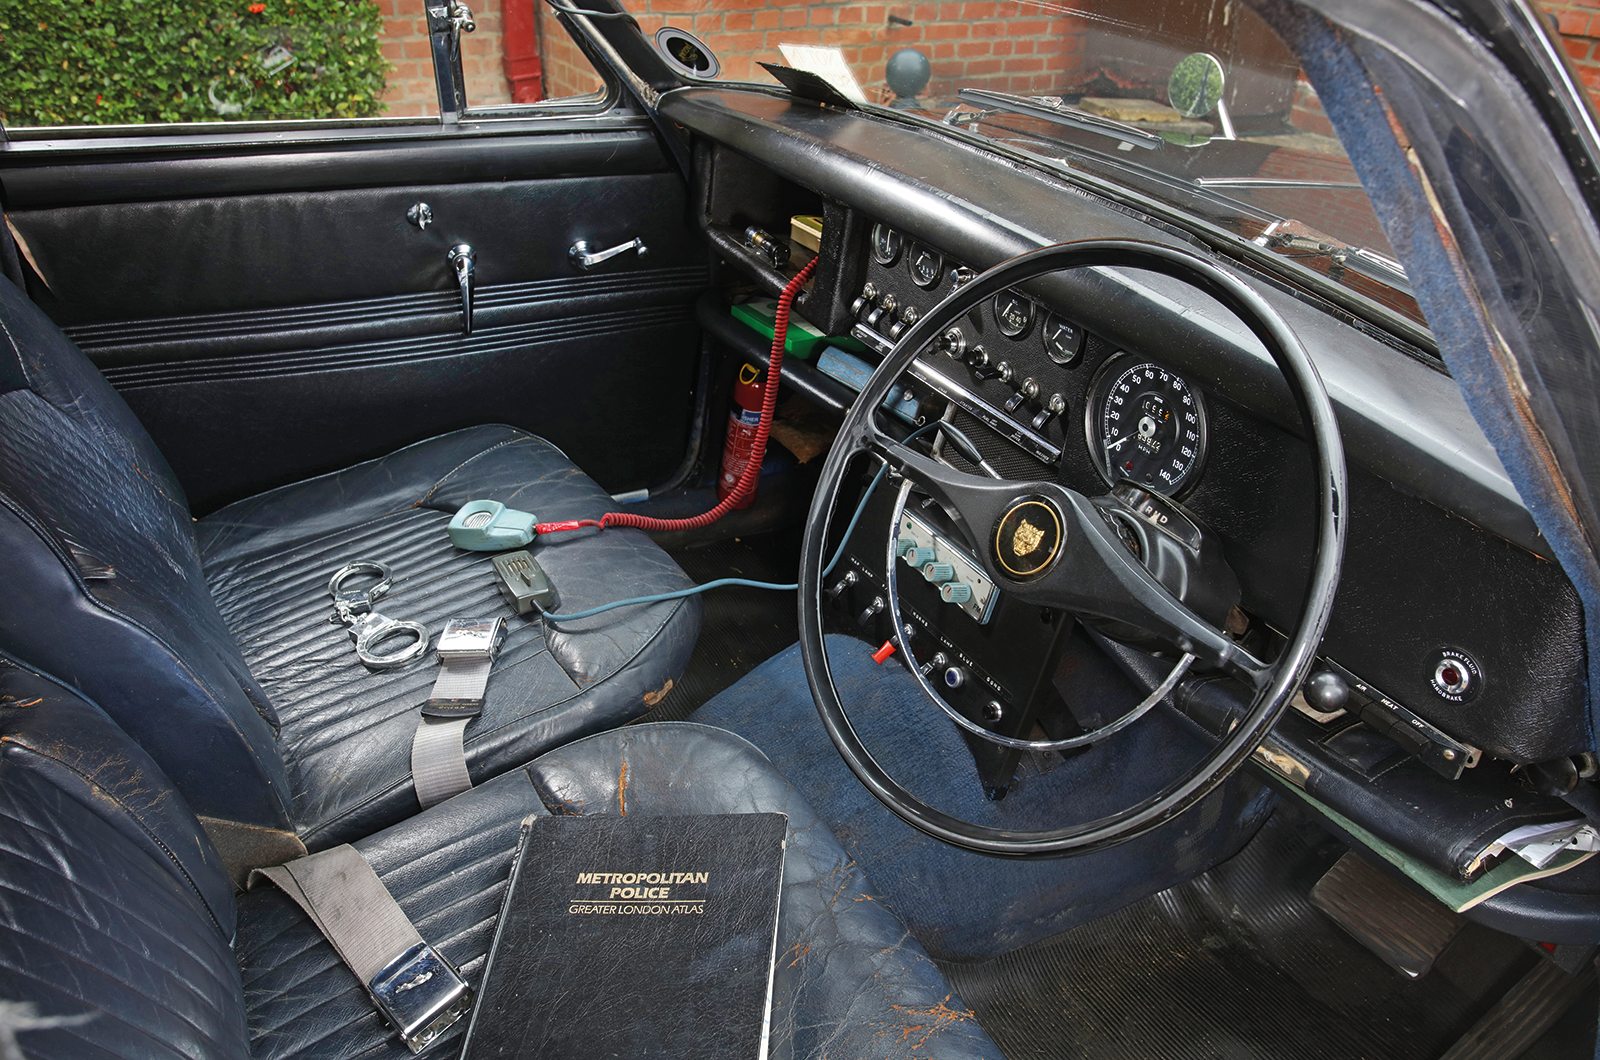 Inside the UK’s finest private collection of classic police cars